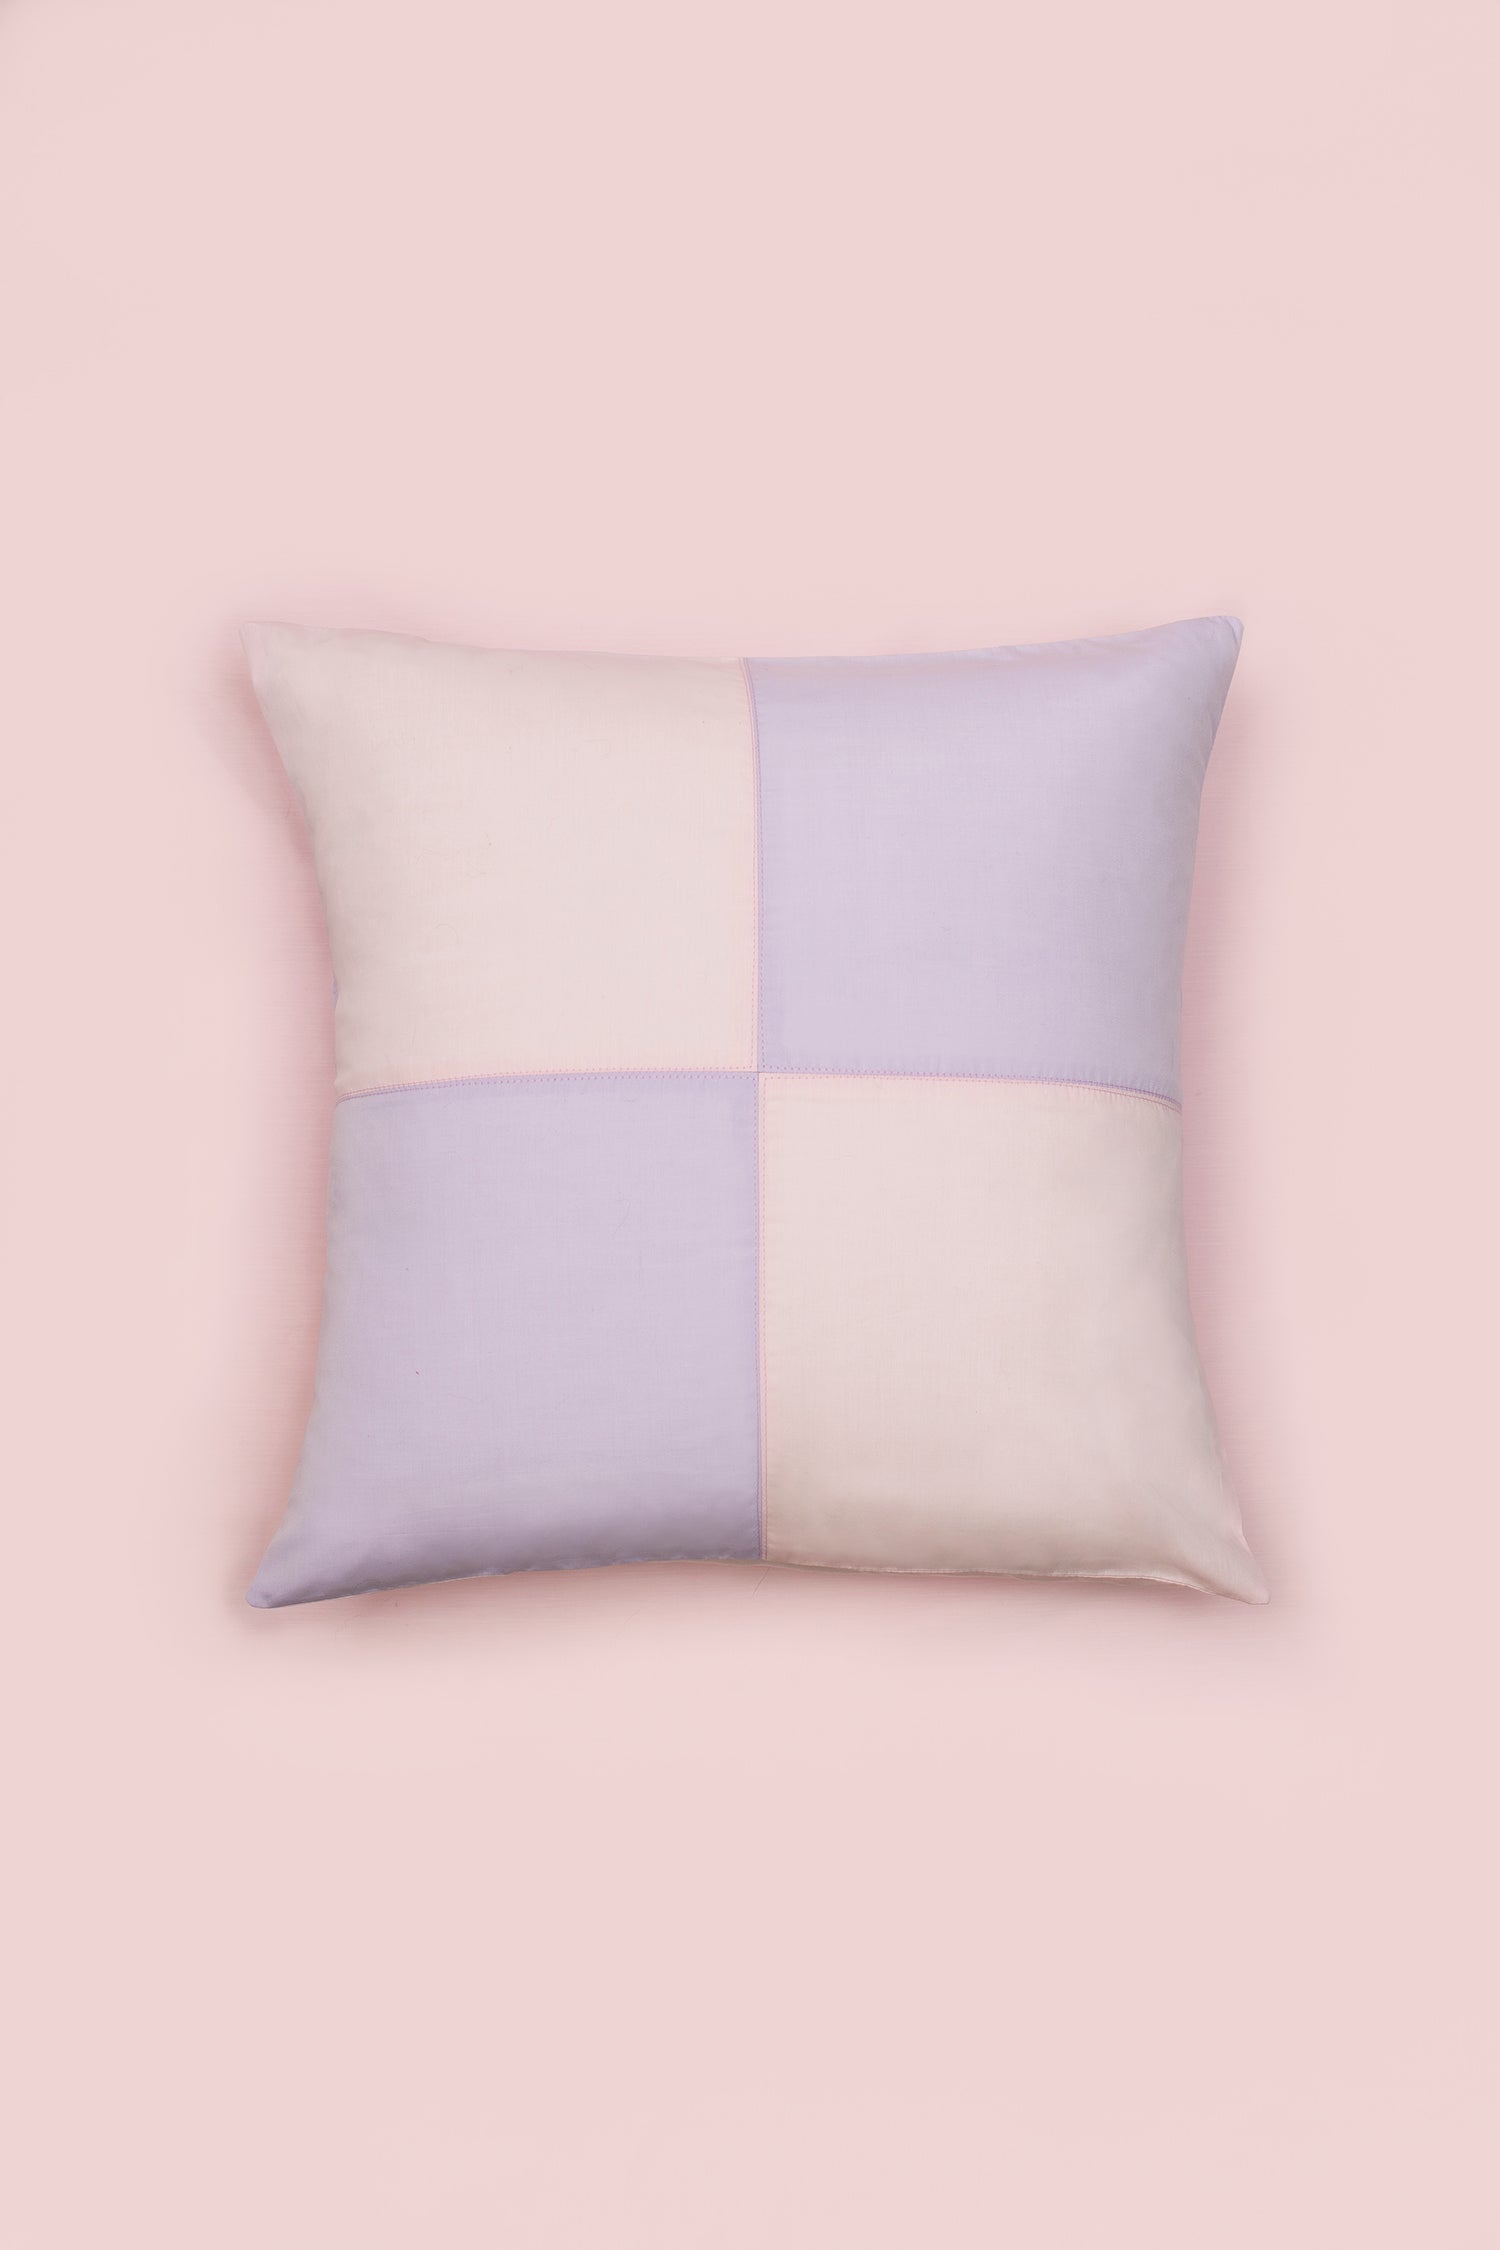 Pink lilac Patchwork Cushion. Square cushion, zero waste sustainable homeware, by Saywood